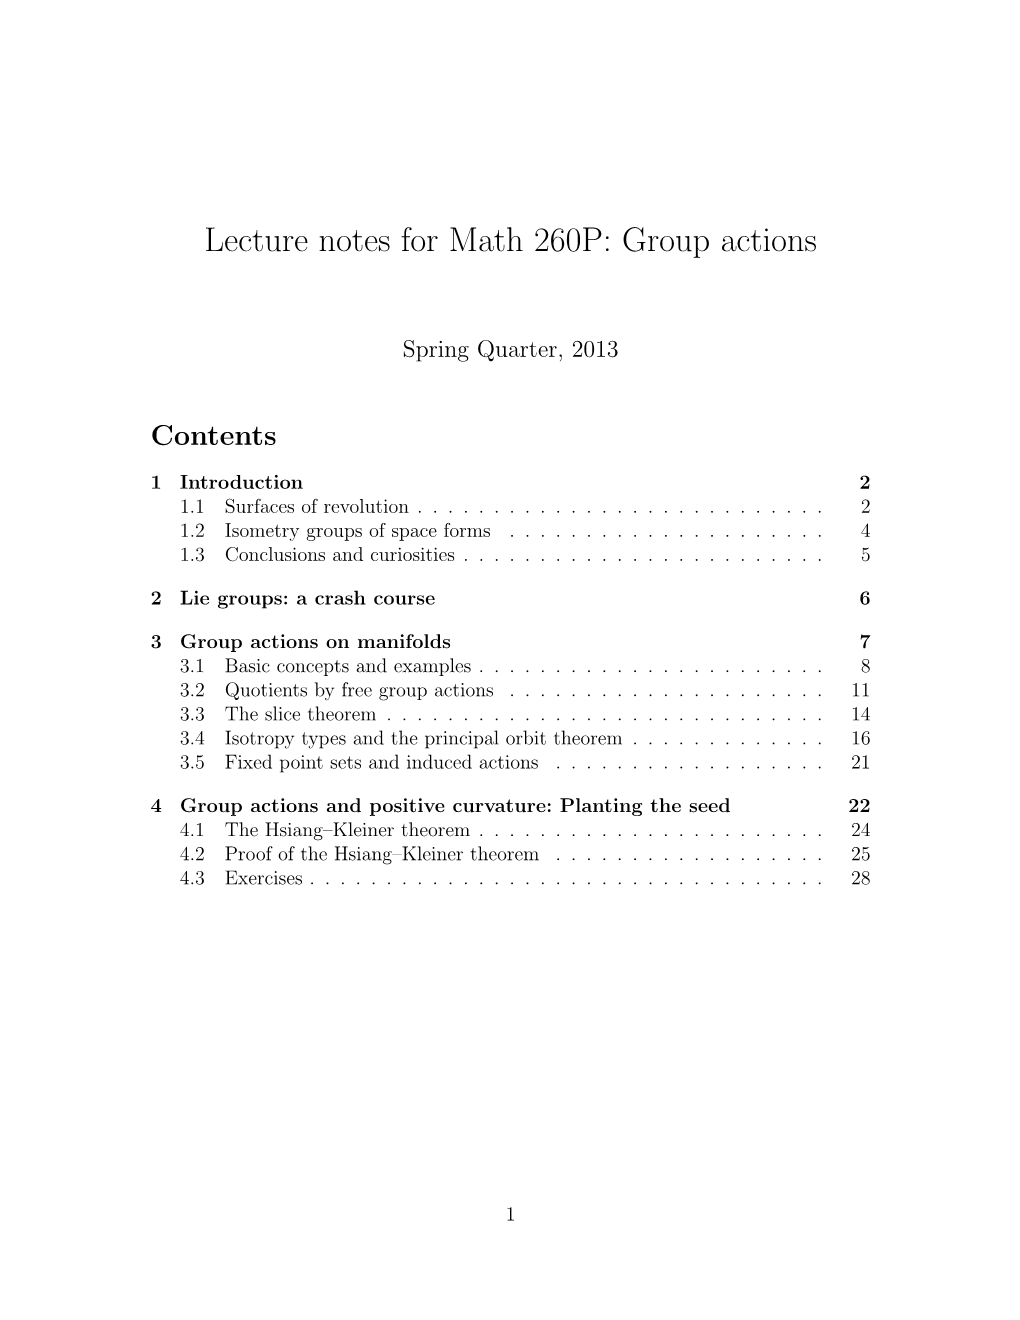 Lecture Notes for Math 260P: Group Actions